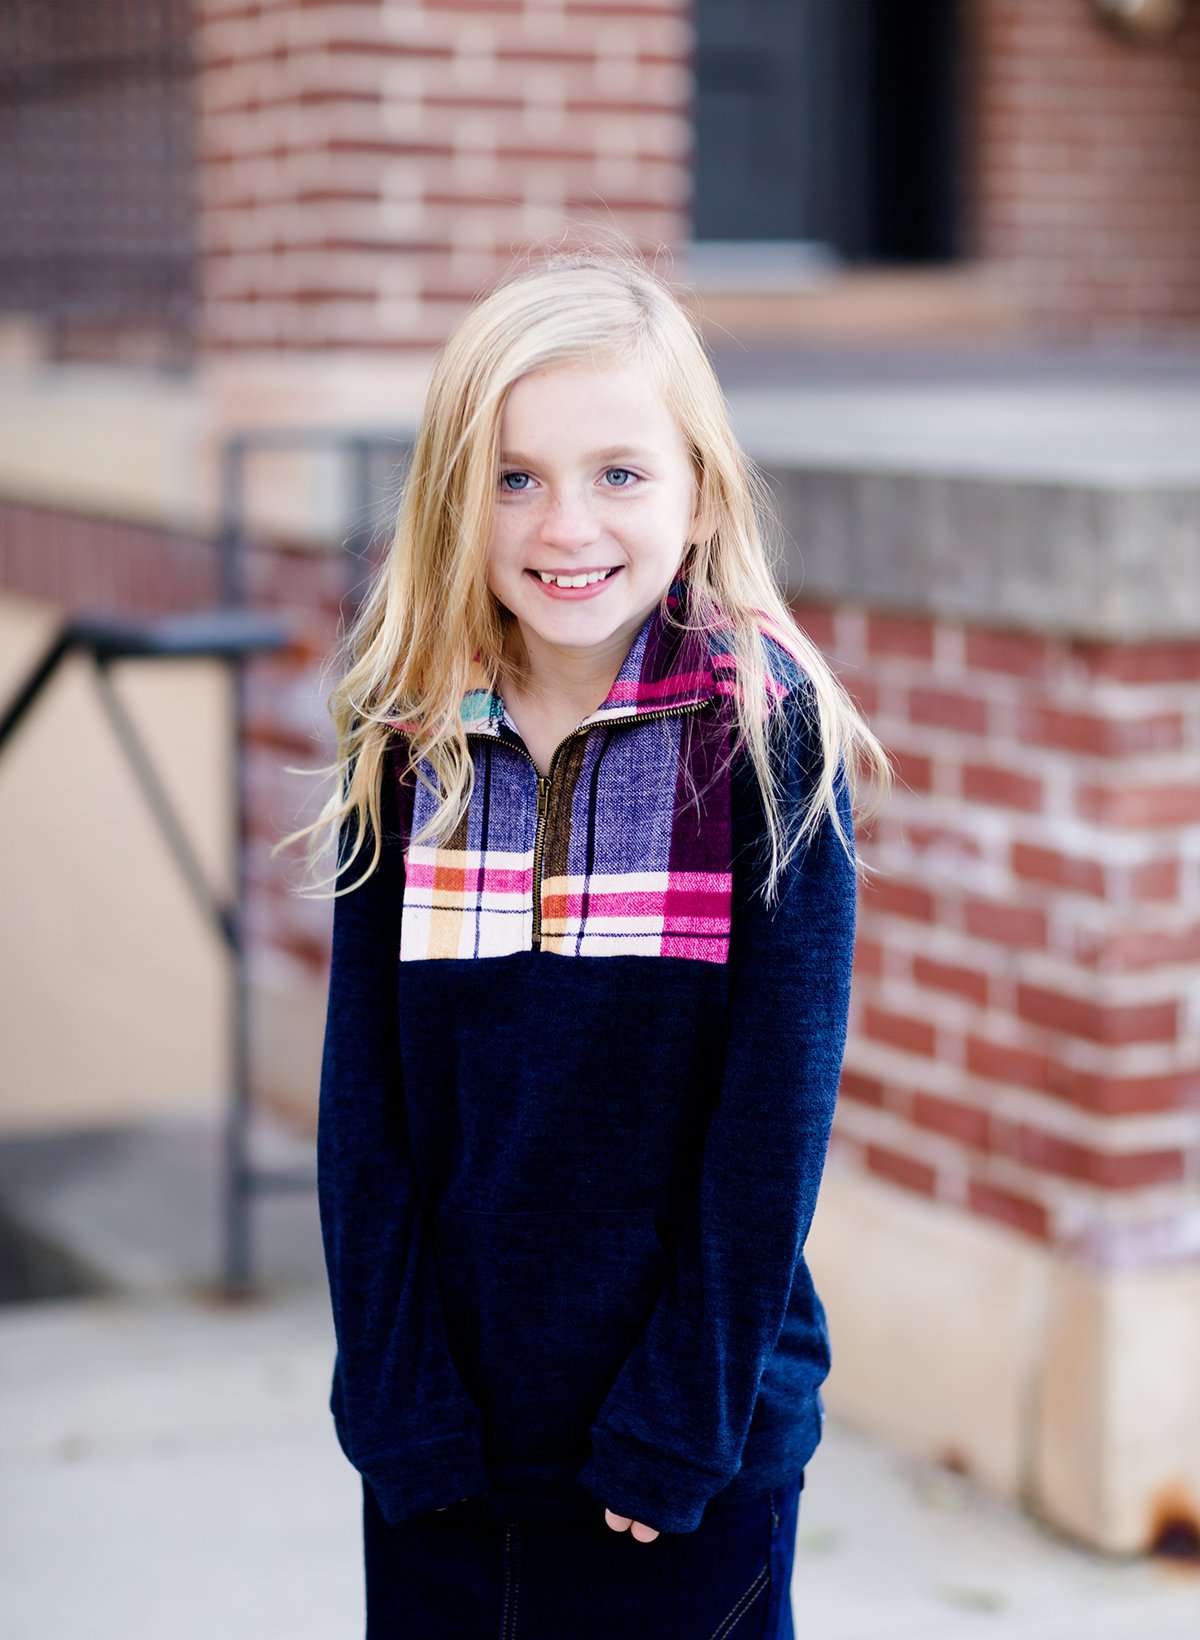 This half zip pullover features a front pouch pocket and a beautiful color block print of fuchsia, teal and mustard!  This young girl is also matching her mother in a mommy and me style.